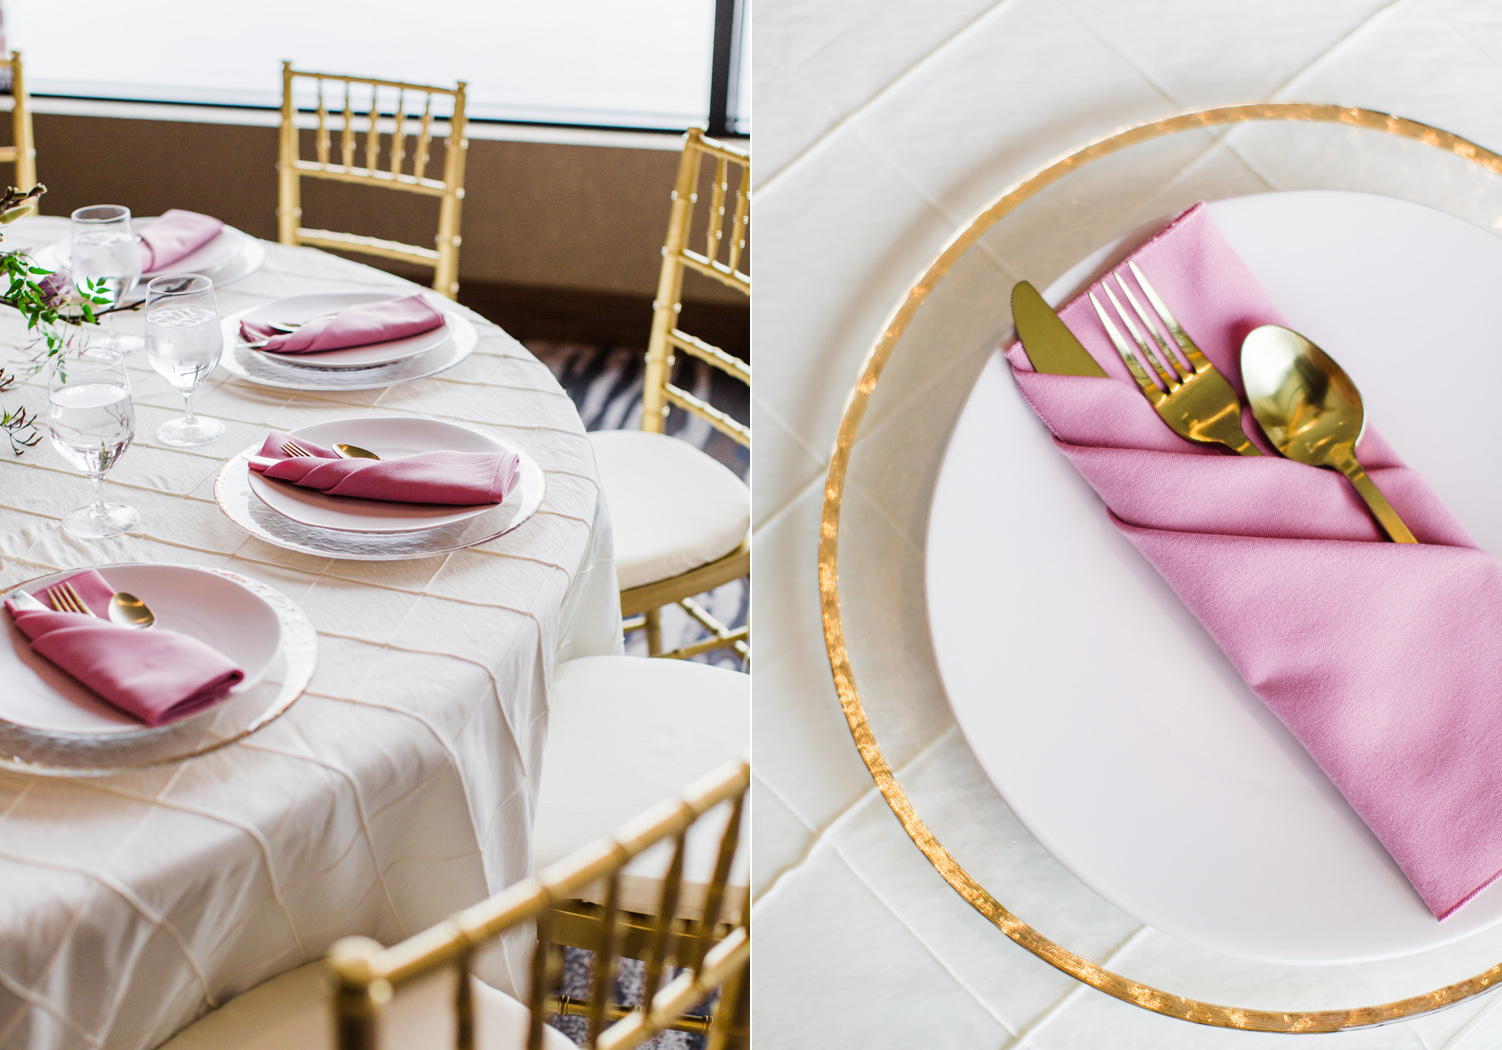 Alexandra Knight Photography Seattle Wedding Photographer pink and gold tropical wedding reception table decor.jpg